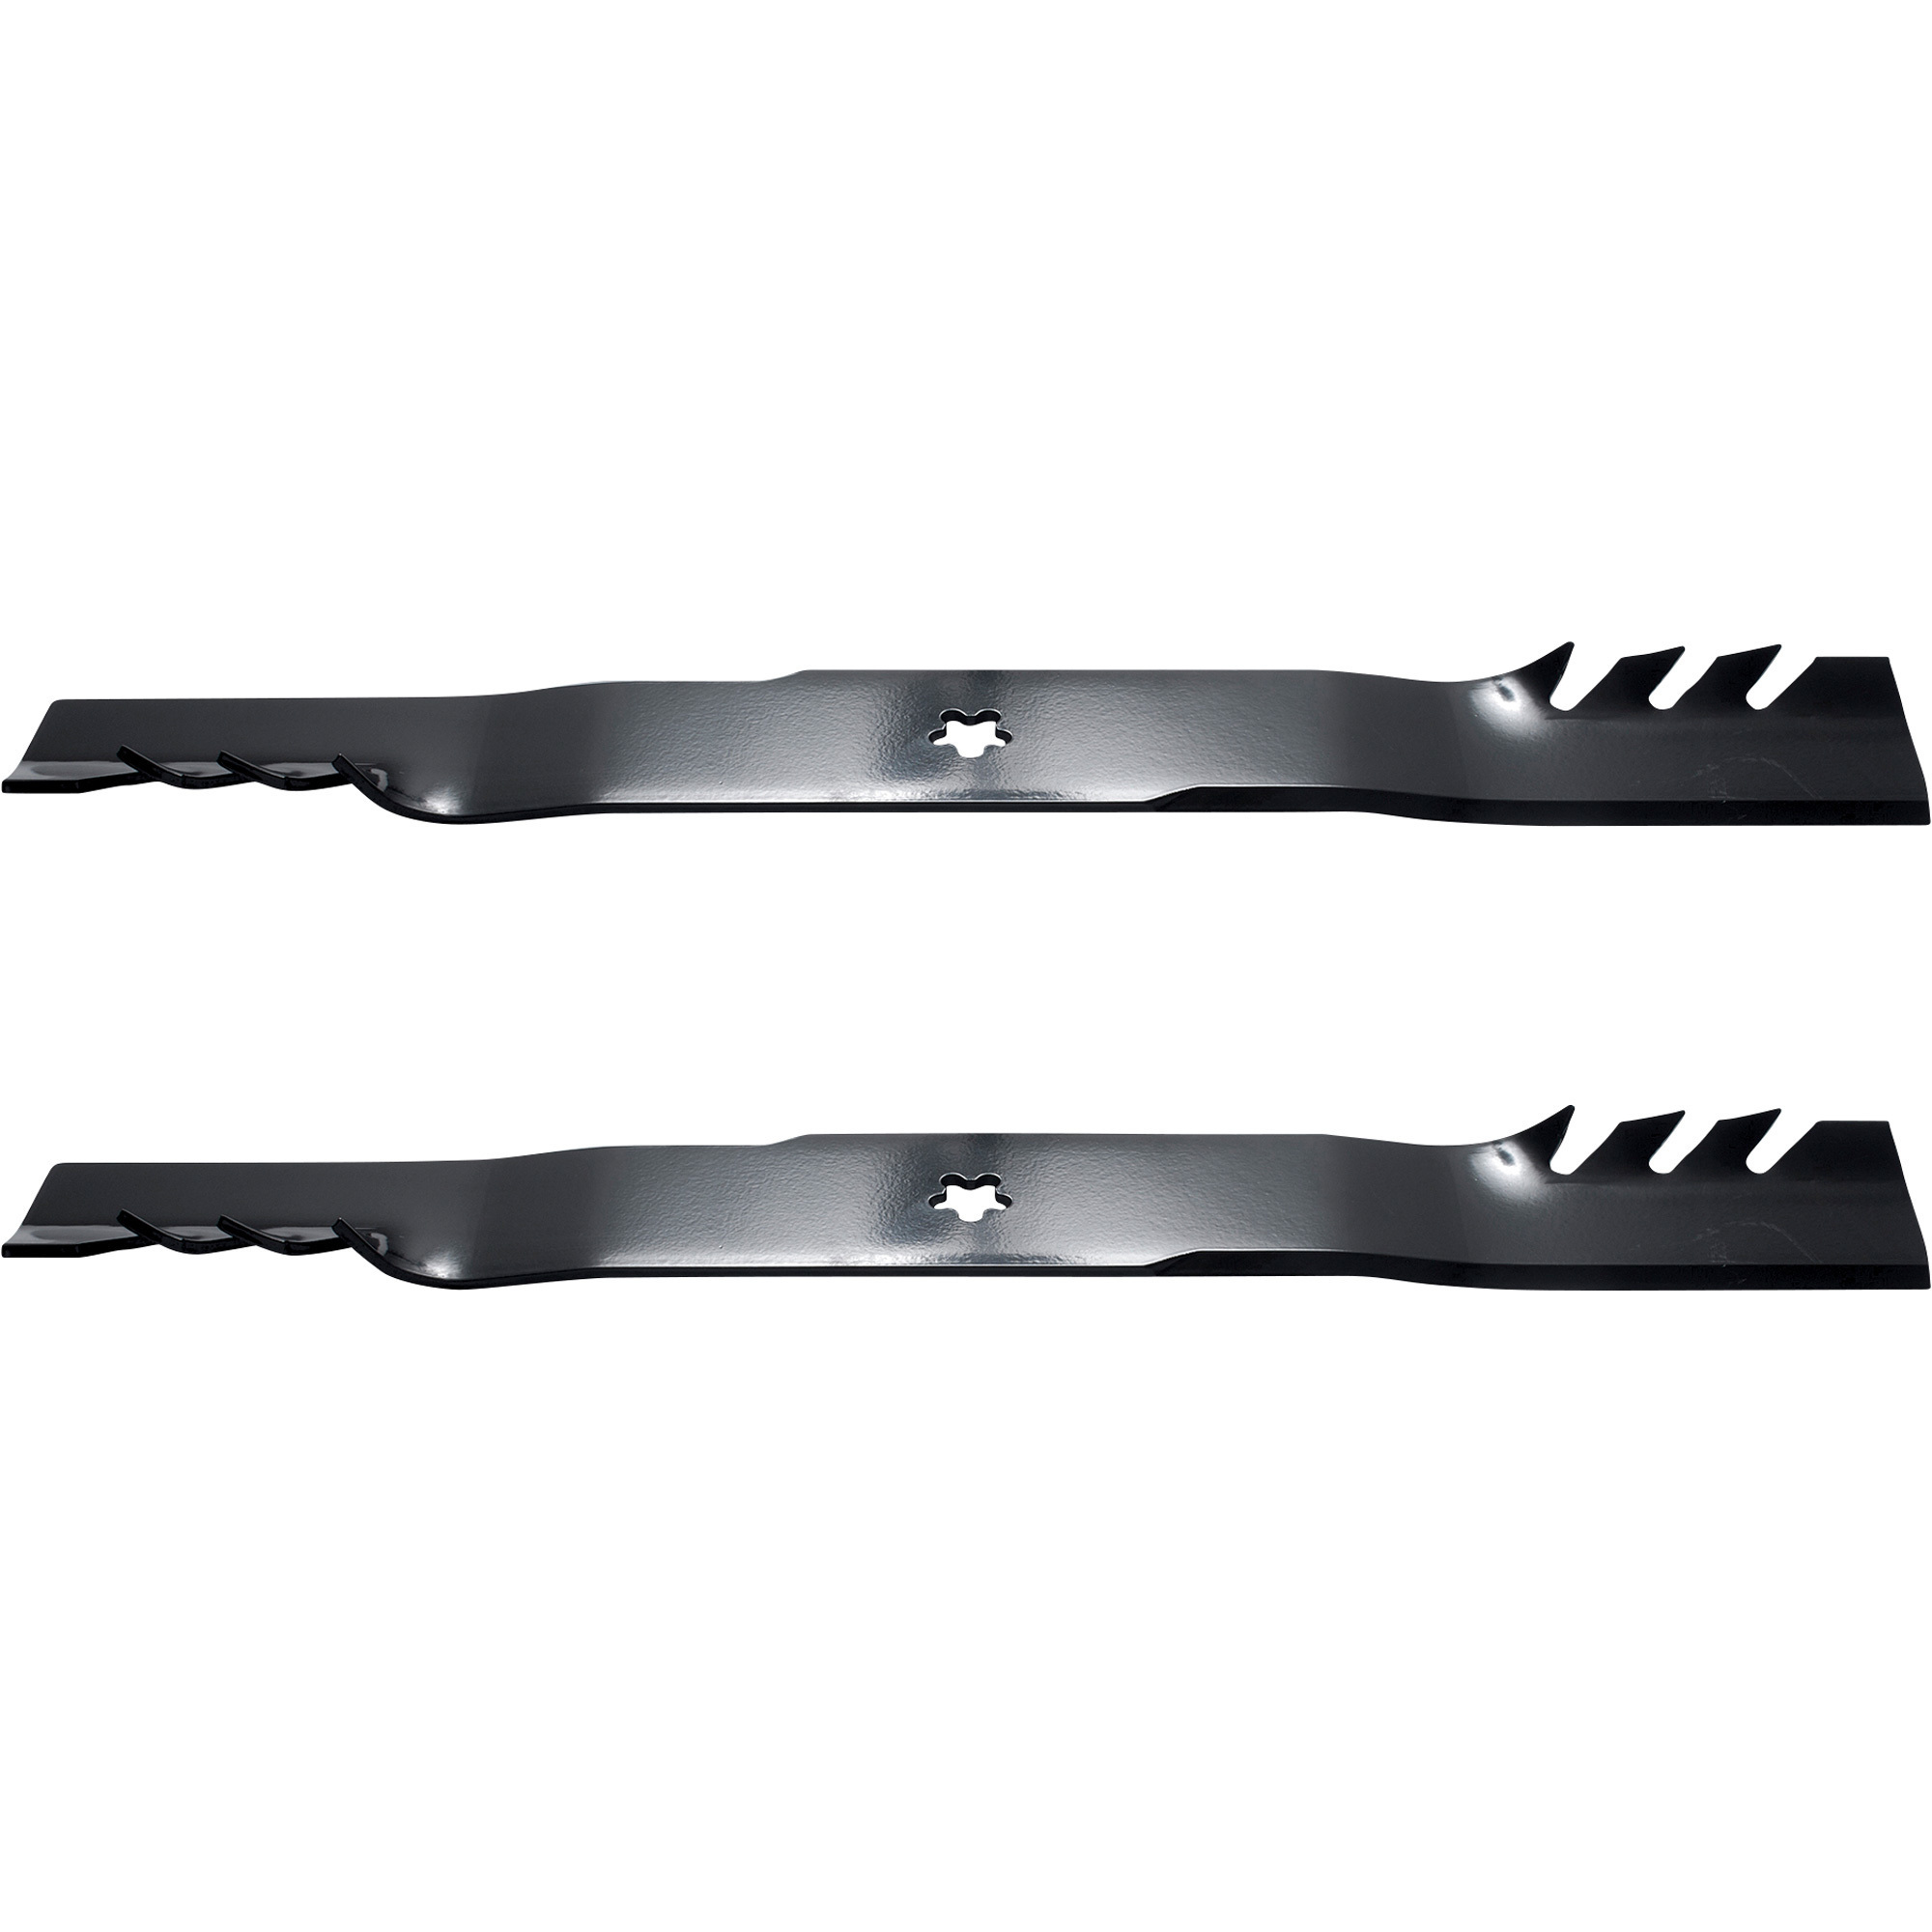 Oregon Gator G3 Replacement Lawn Mower Blades, 2-Piece Set, Fits 46Inch Mowers, Model 528926